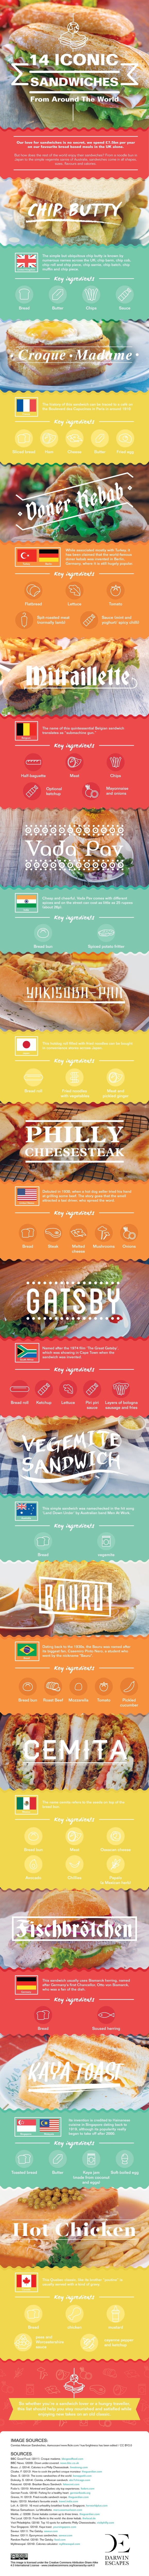 iconic-sandwiches-from-around-the-world